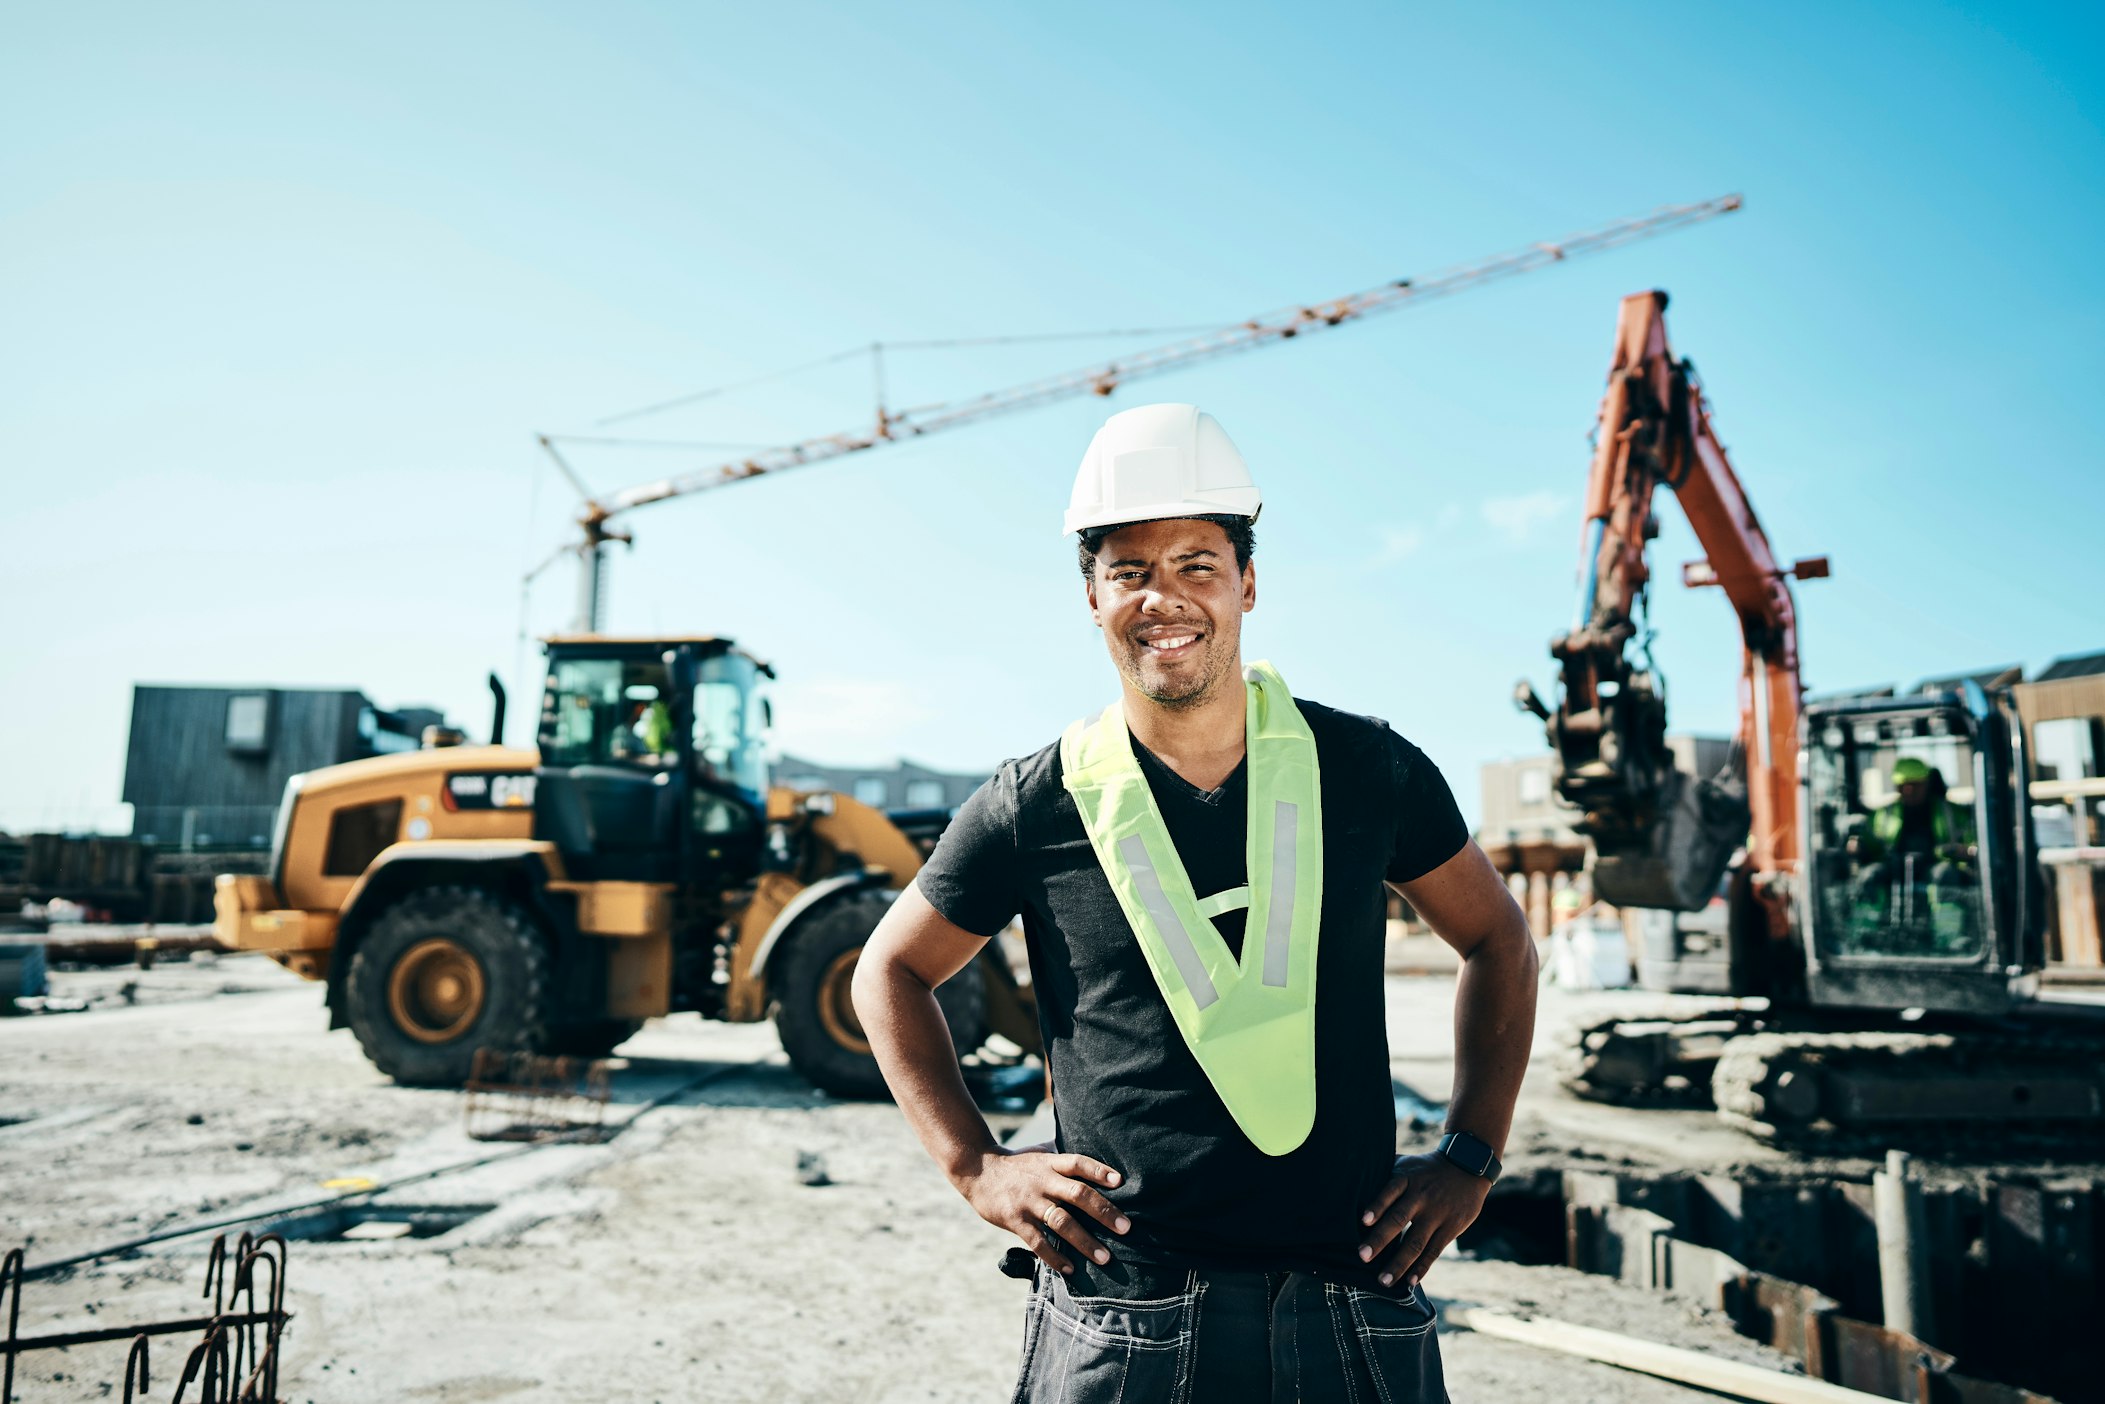 Construction worker wearing white hard hat on construction site with machinery in the background